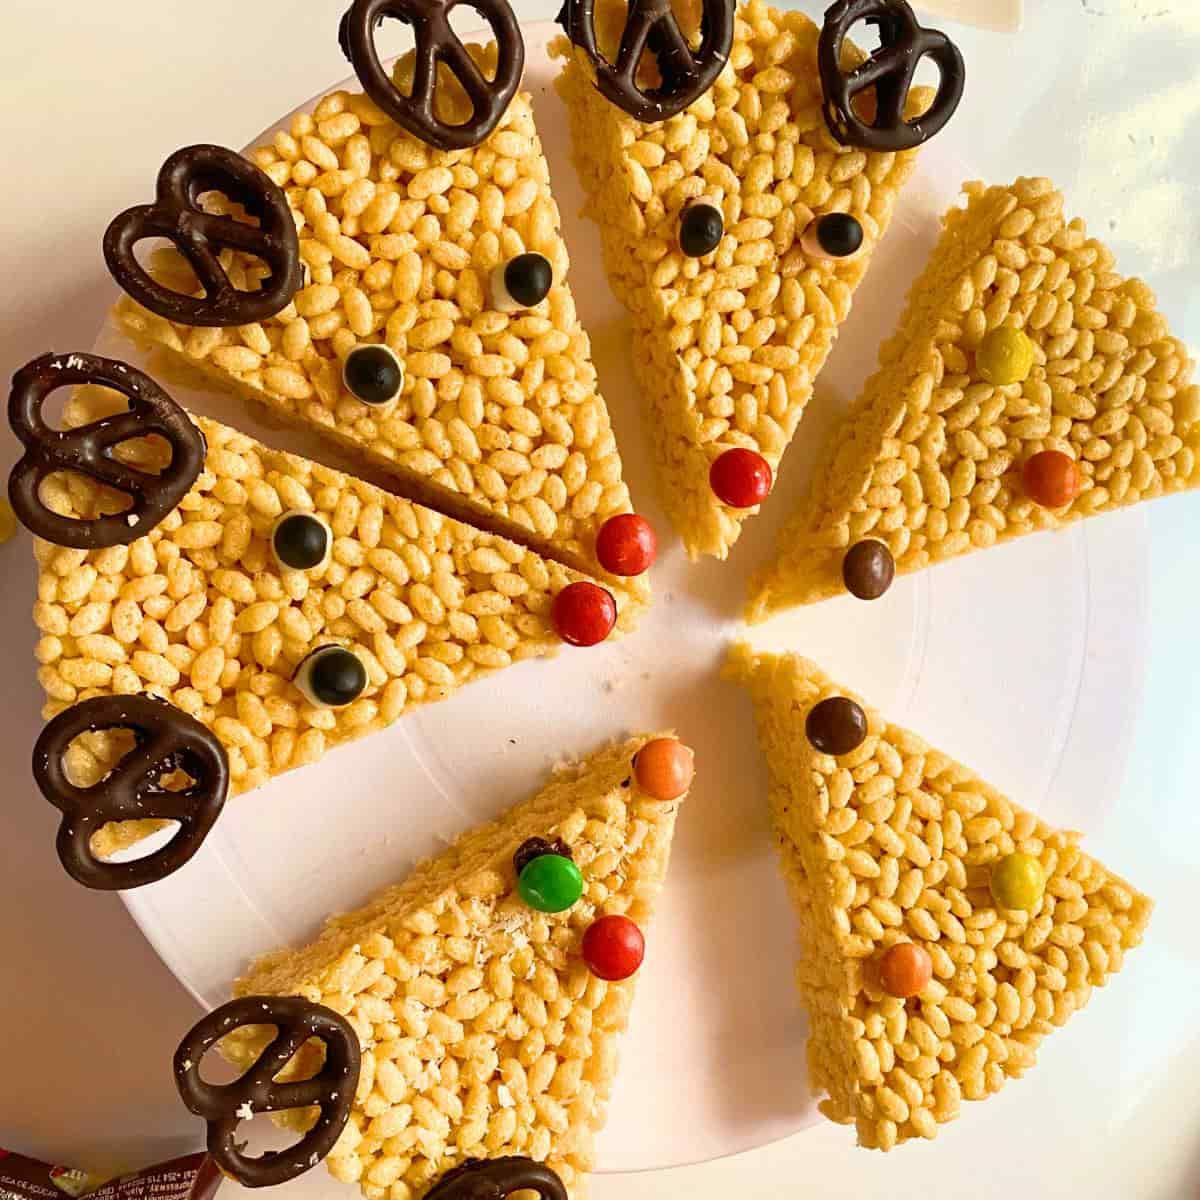 Reindeer Rice Krispies Treats on a white surface.